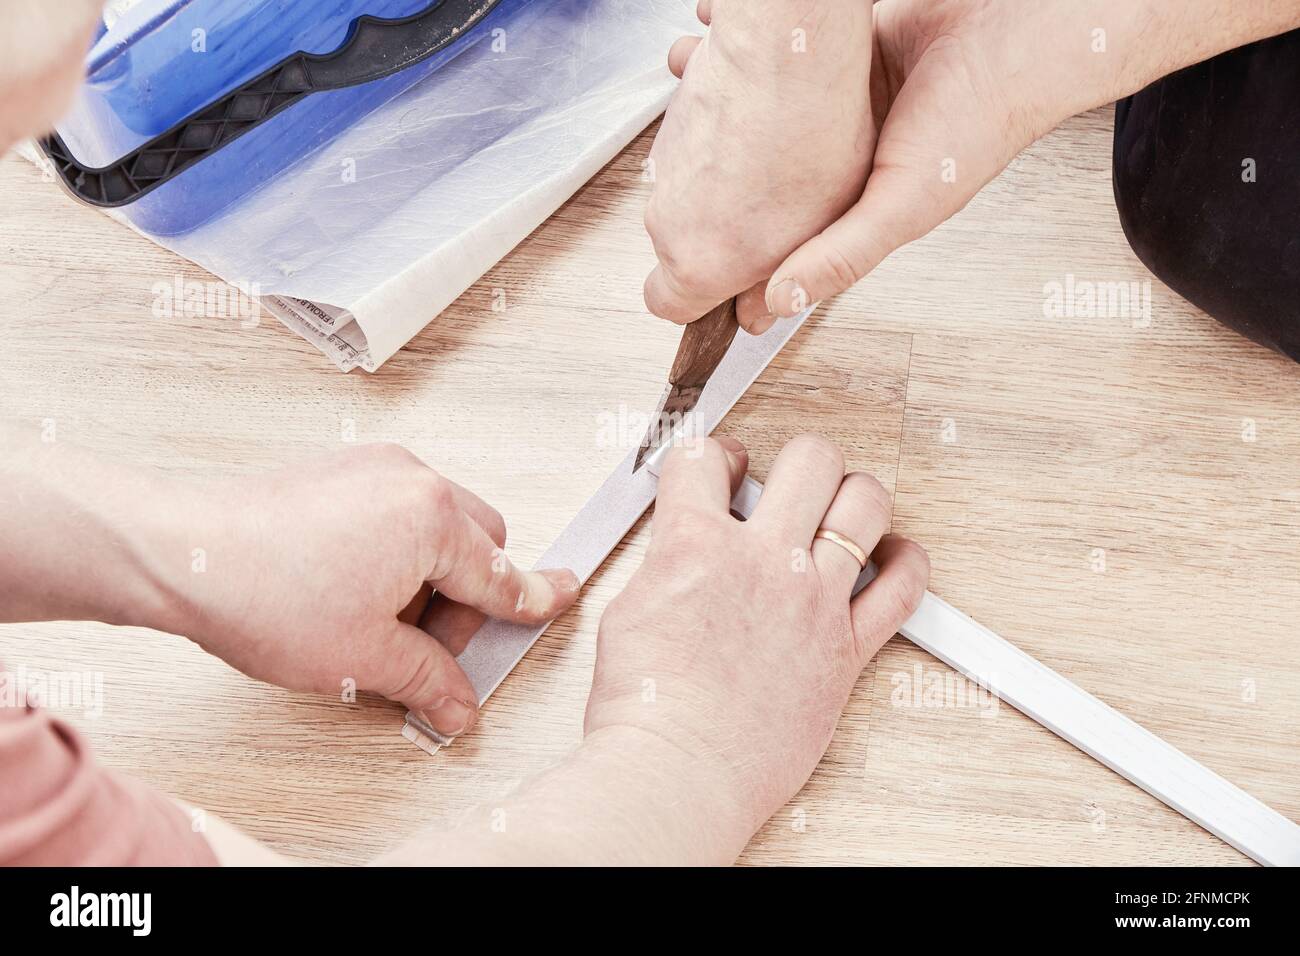 Skilled workers cut a wooden molding on the floor during wardrobe installation in light room extreme close view Stock Photo